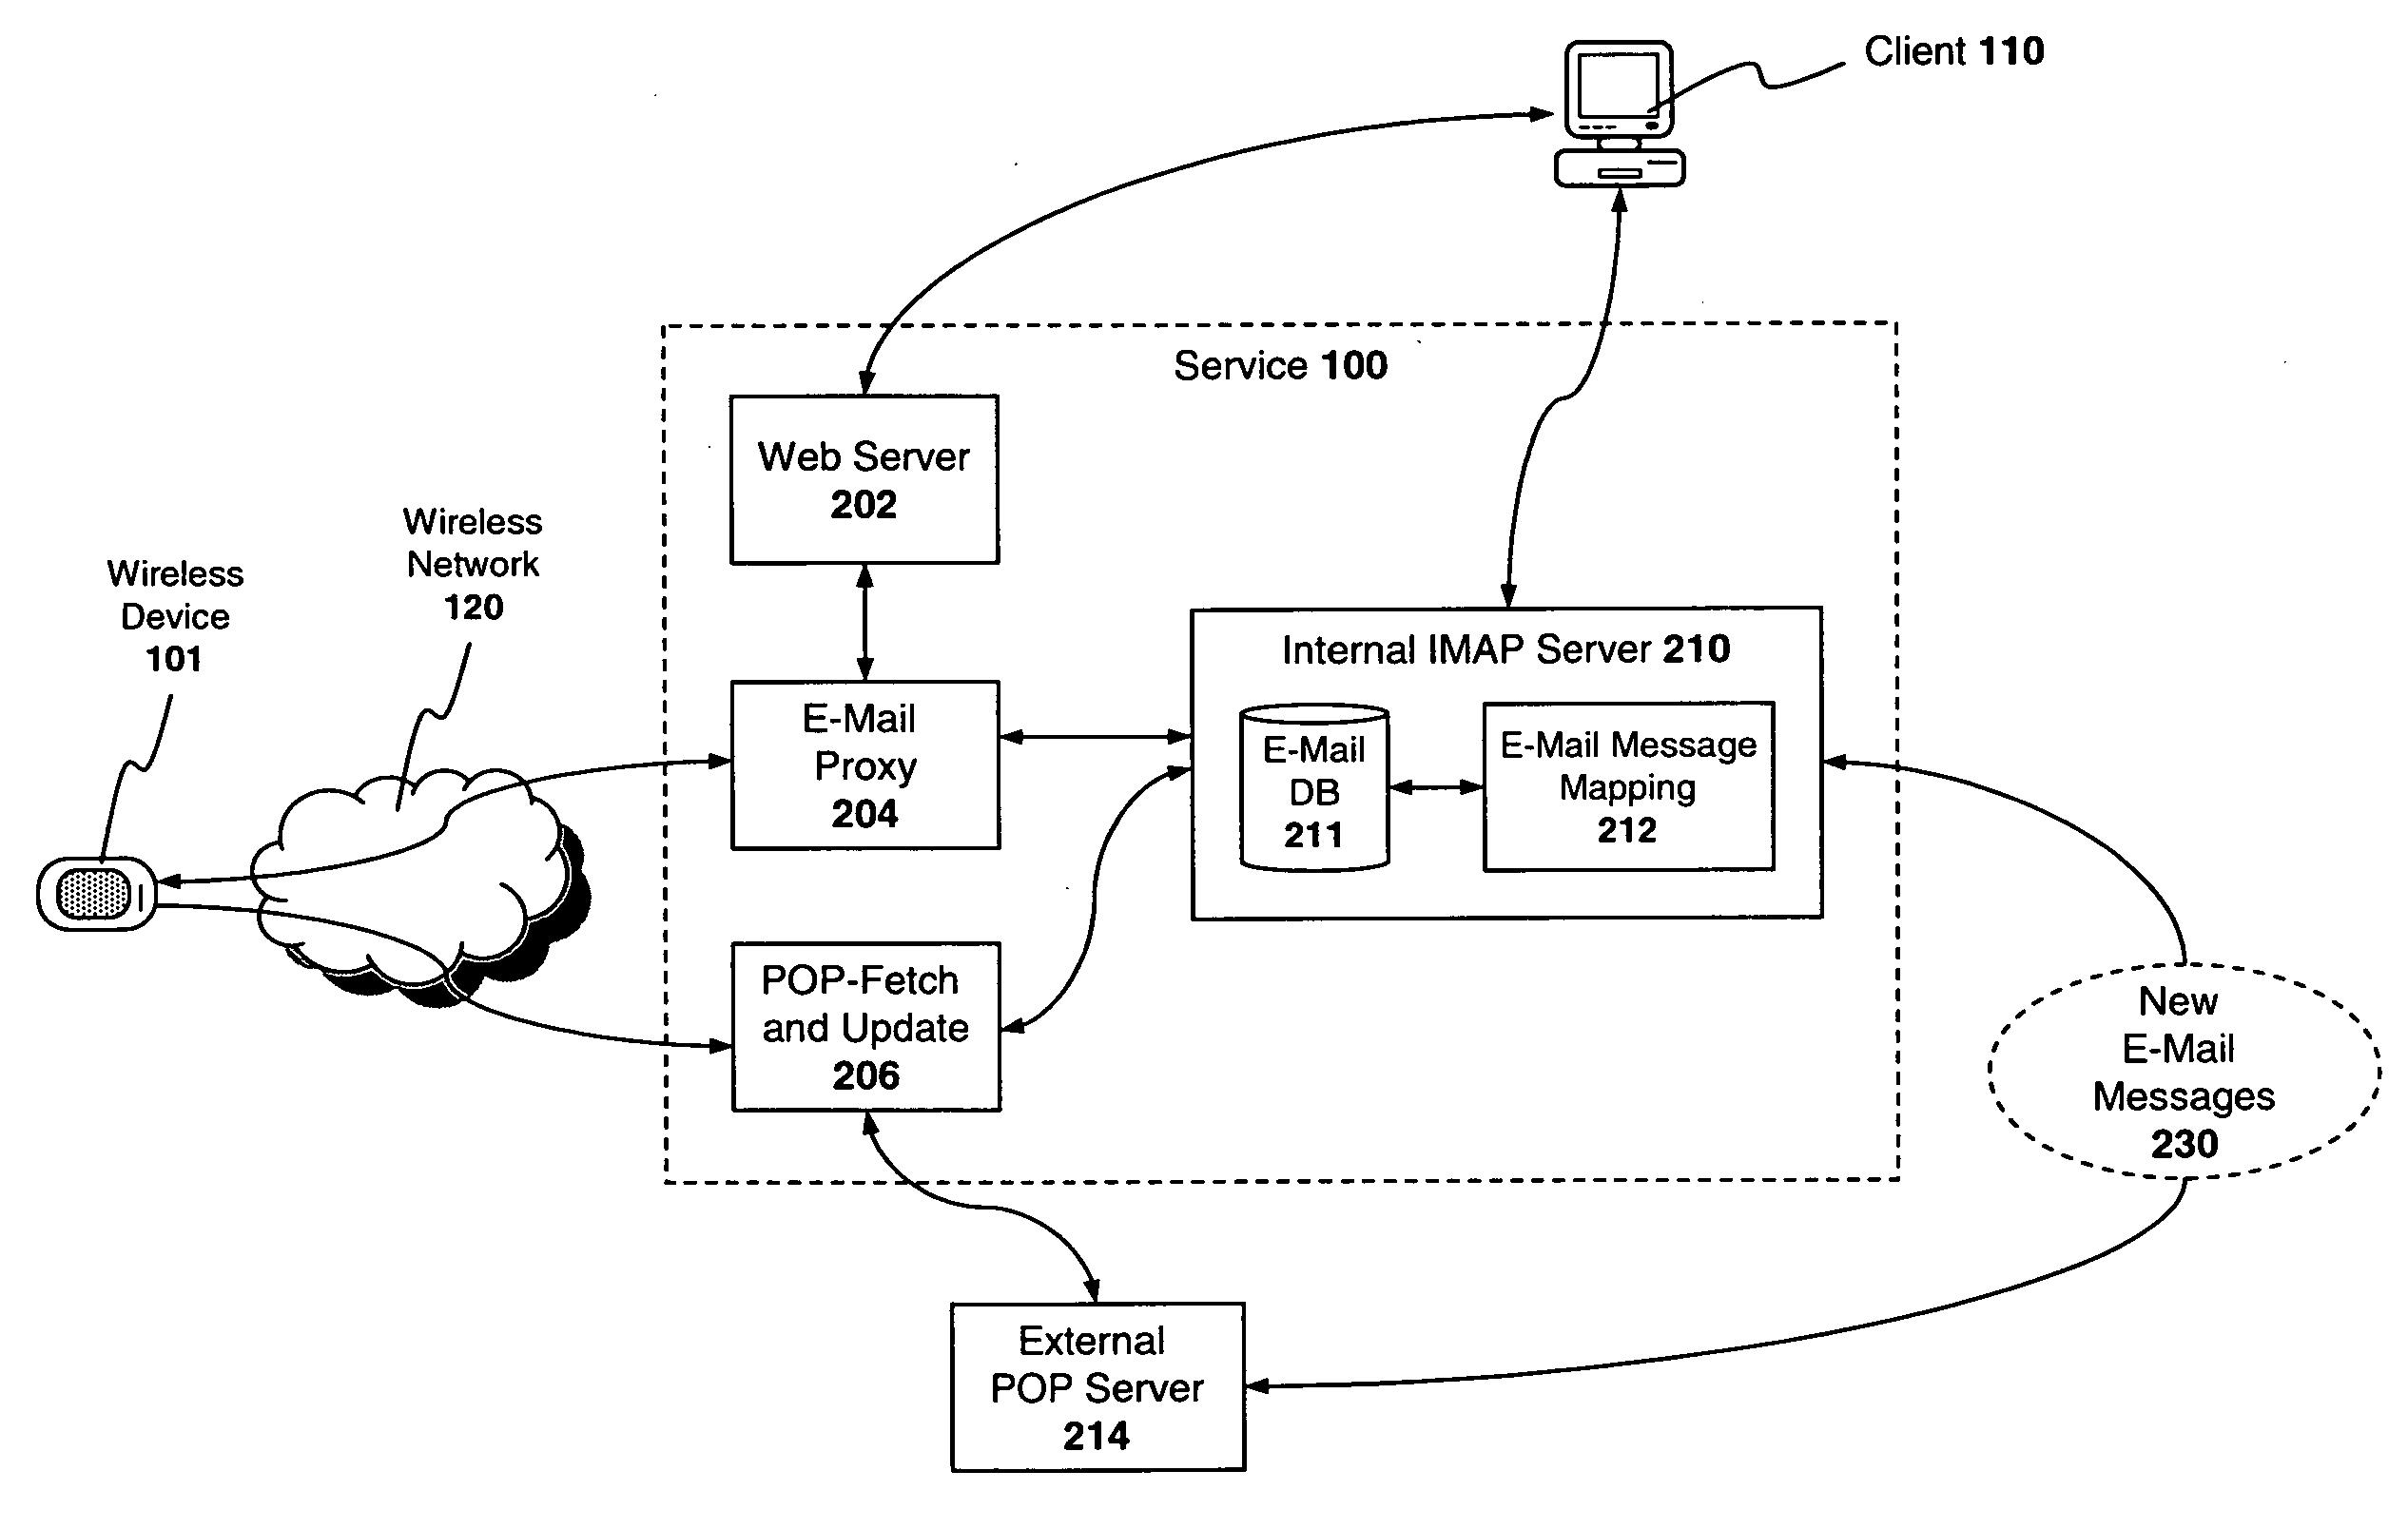 Apparatus and method for caching email messages within a wireless data service